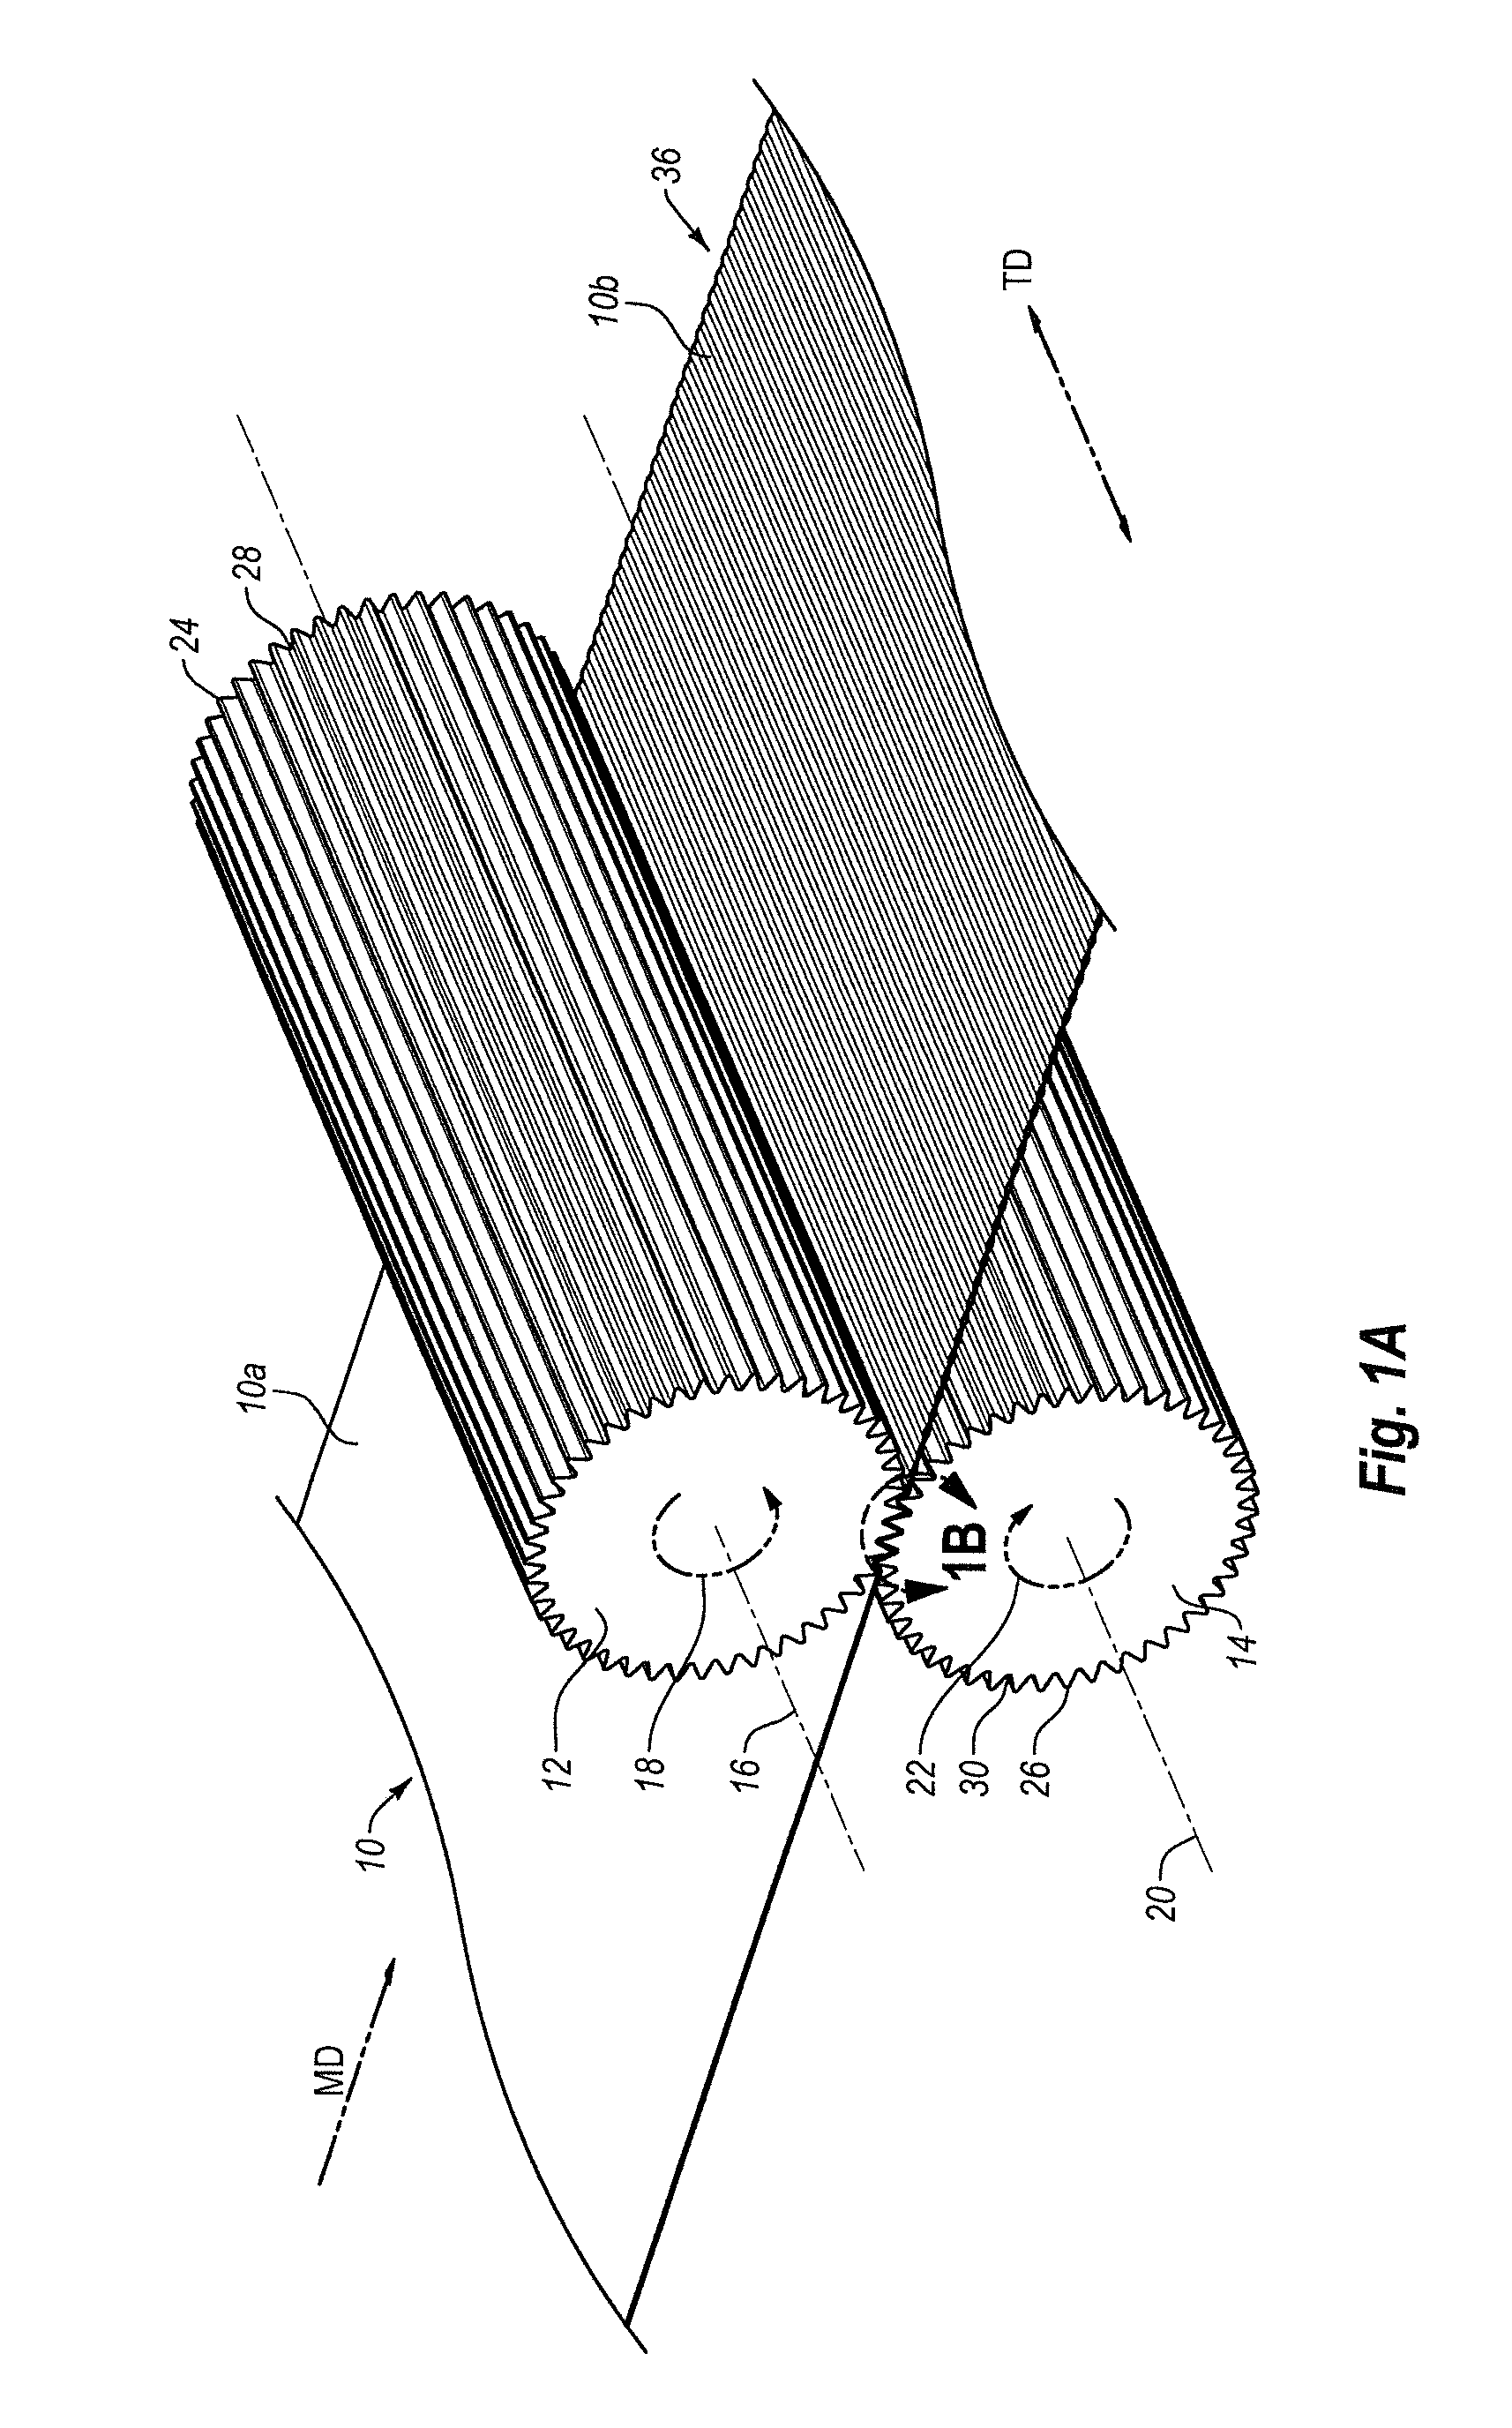 Multi-layered lightly-laminated films and methods of making the same